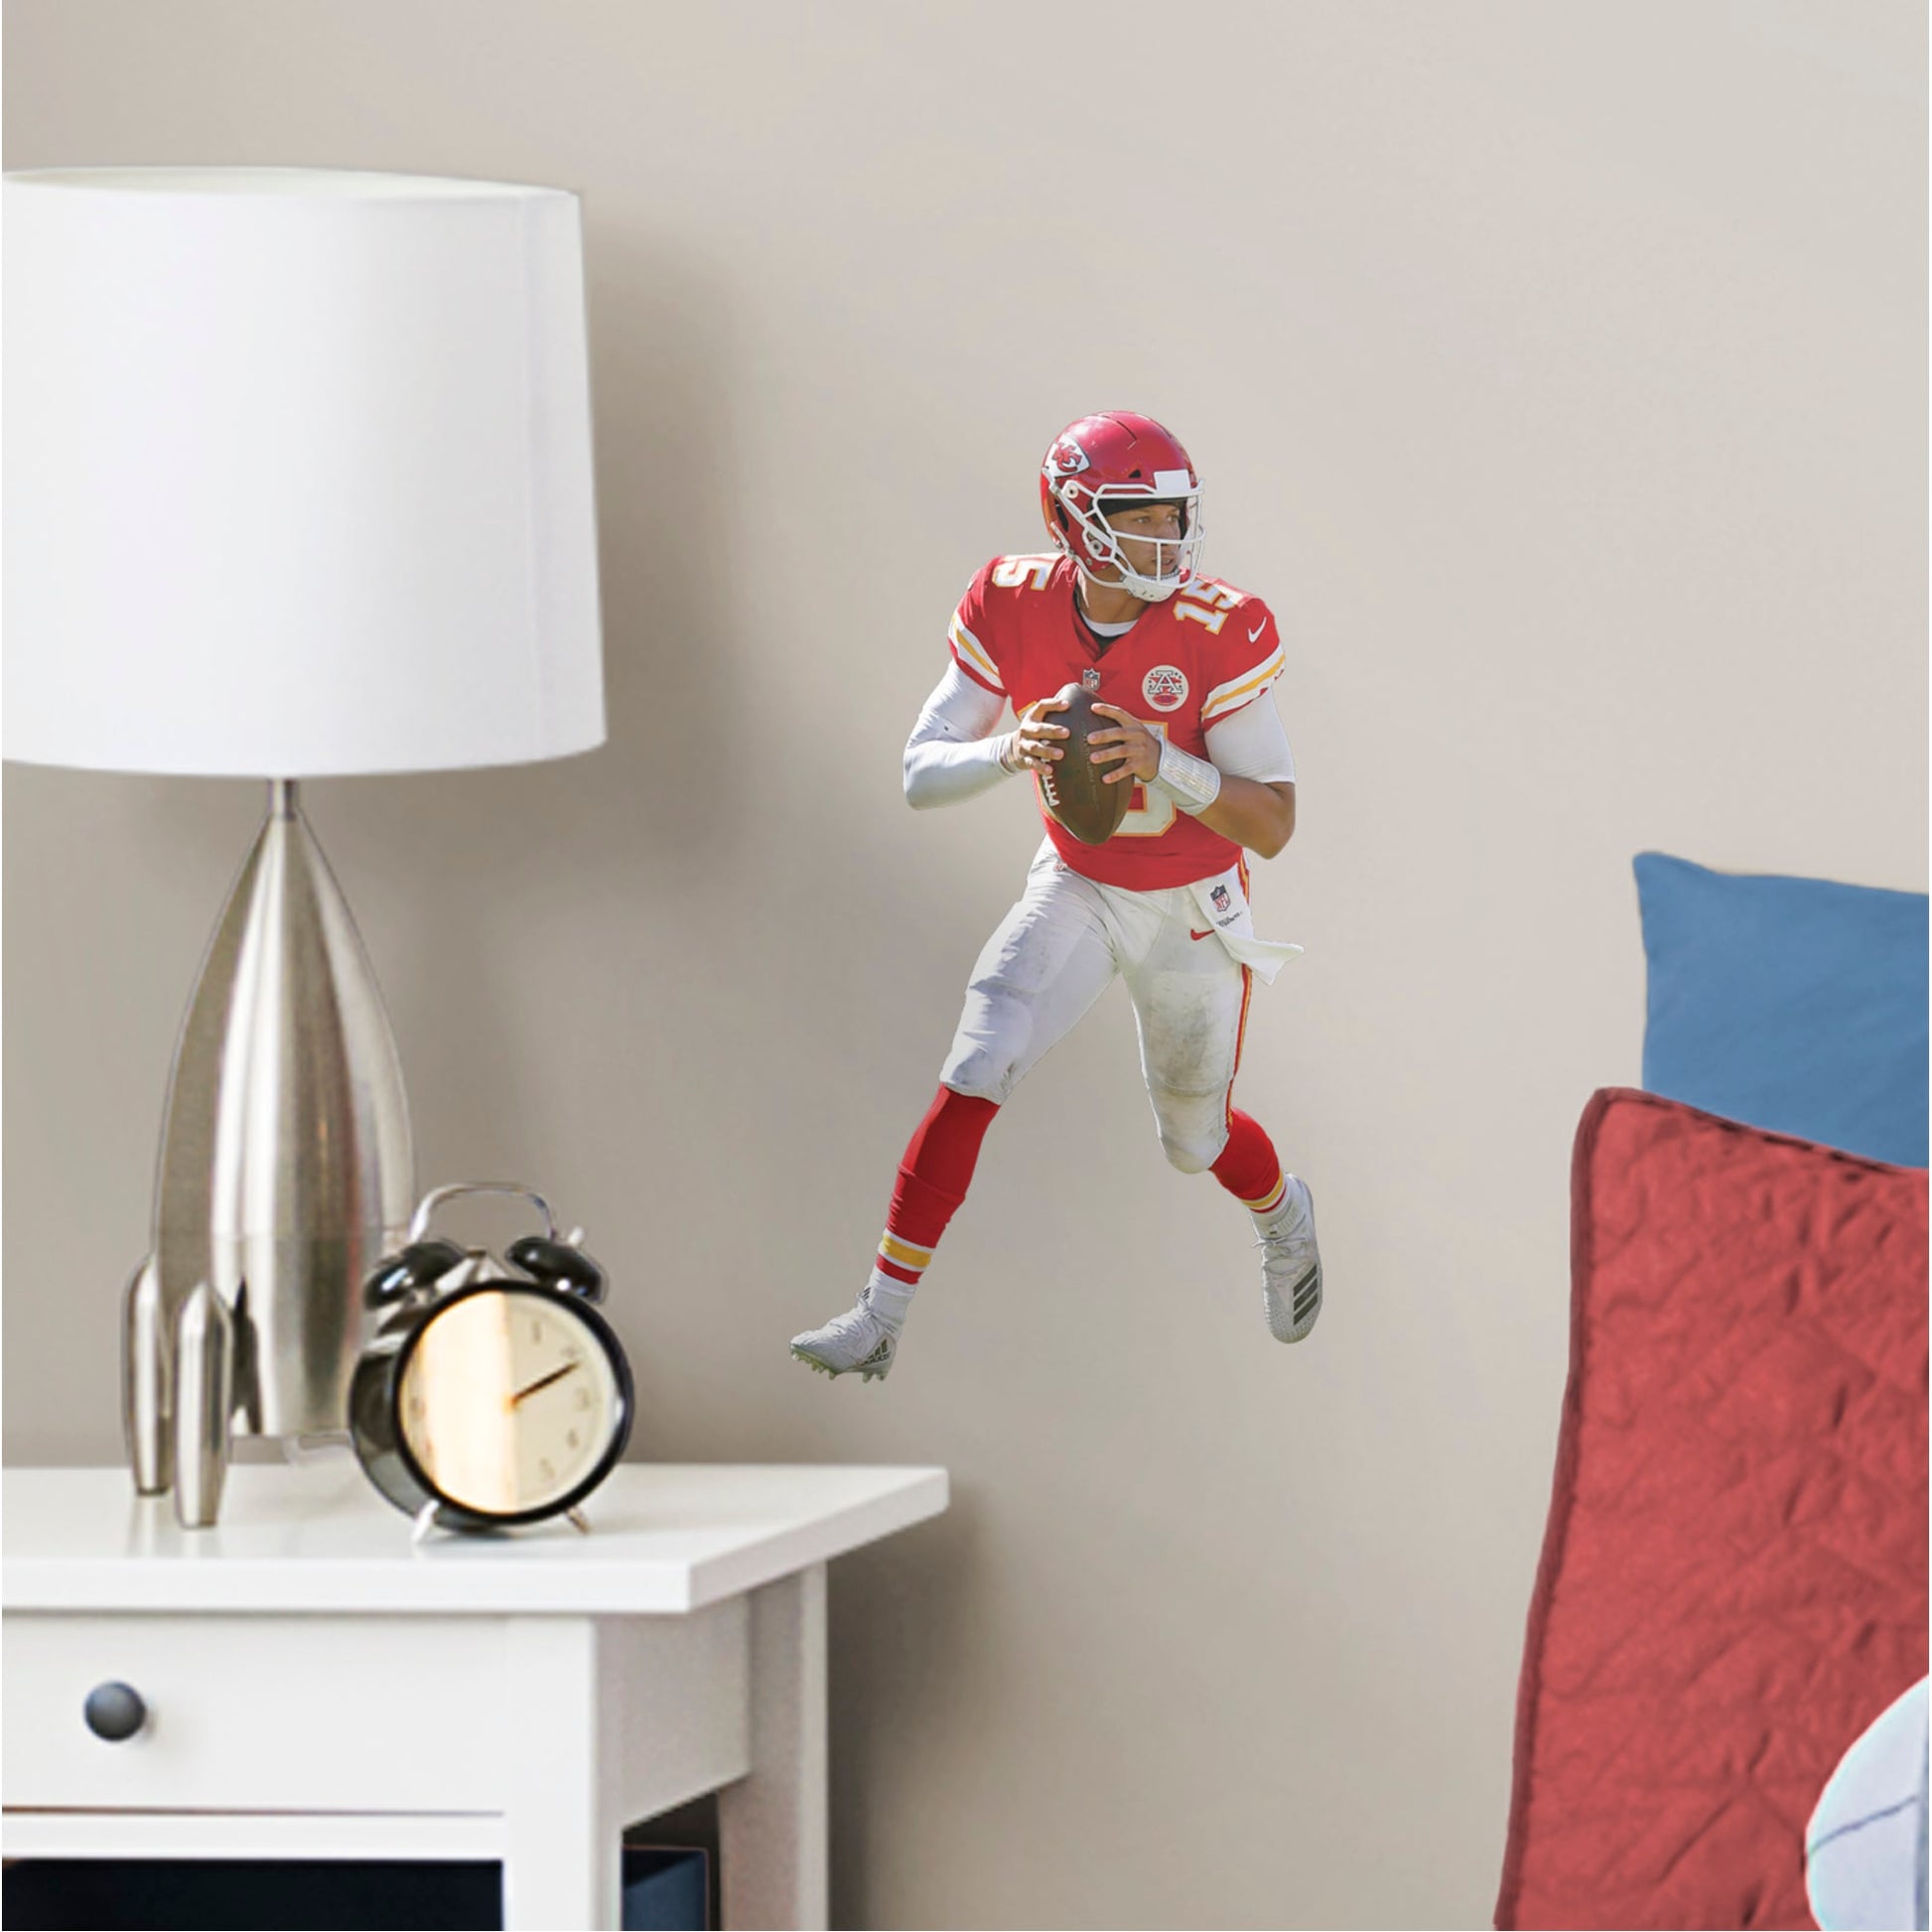 Large Athlete + 2 Decals (9"W x 17"H) Chiefs fans understand "You Gotta Fight for Your Right To Party," but QB Patrick Mahomes makes winning look easy. The man they call Showtime led KC to the ultimate victory celebration at Super Bowl LIV. Now you can turn your home or office into a Sea of Red with a Patrick Mahomes Removable Wall Decal Collection. The sturdy vinyl, life-size version of the MVP would look good on a bedroom or home office wall. Go ahead, party on!